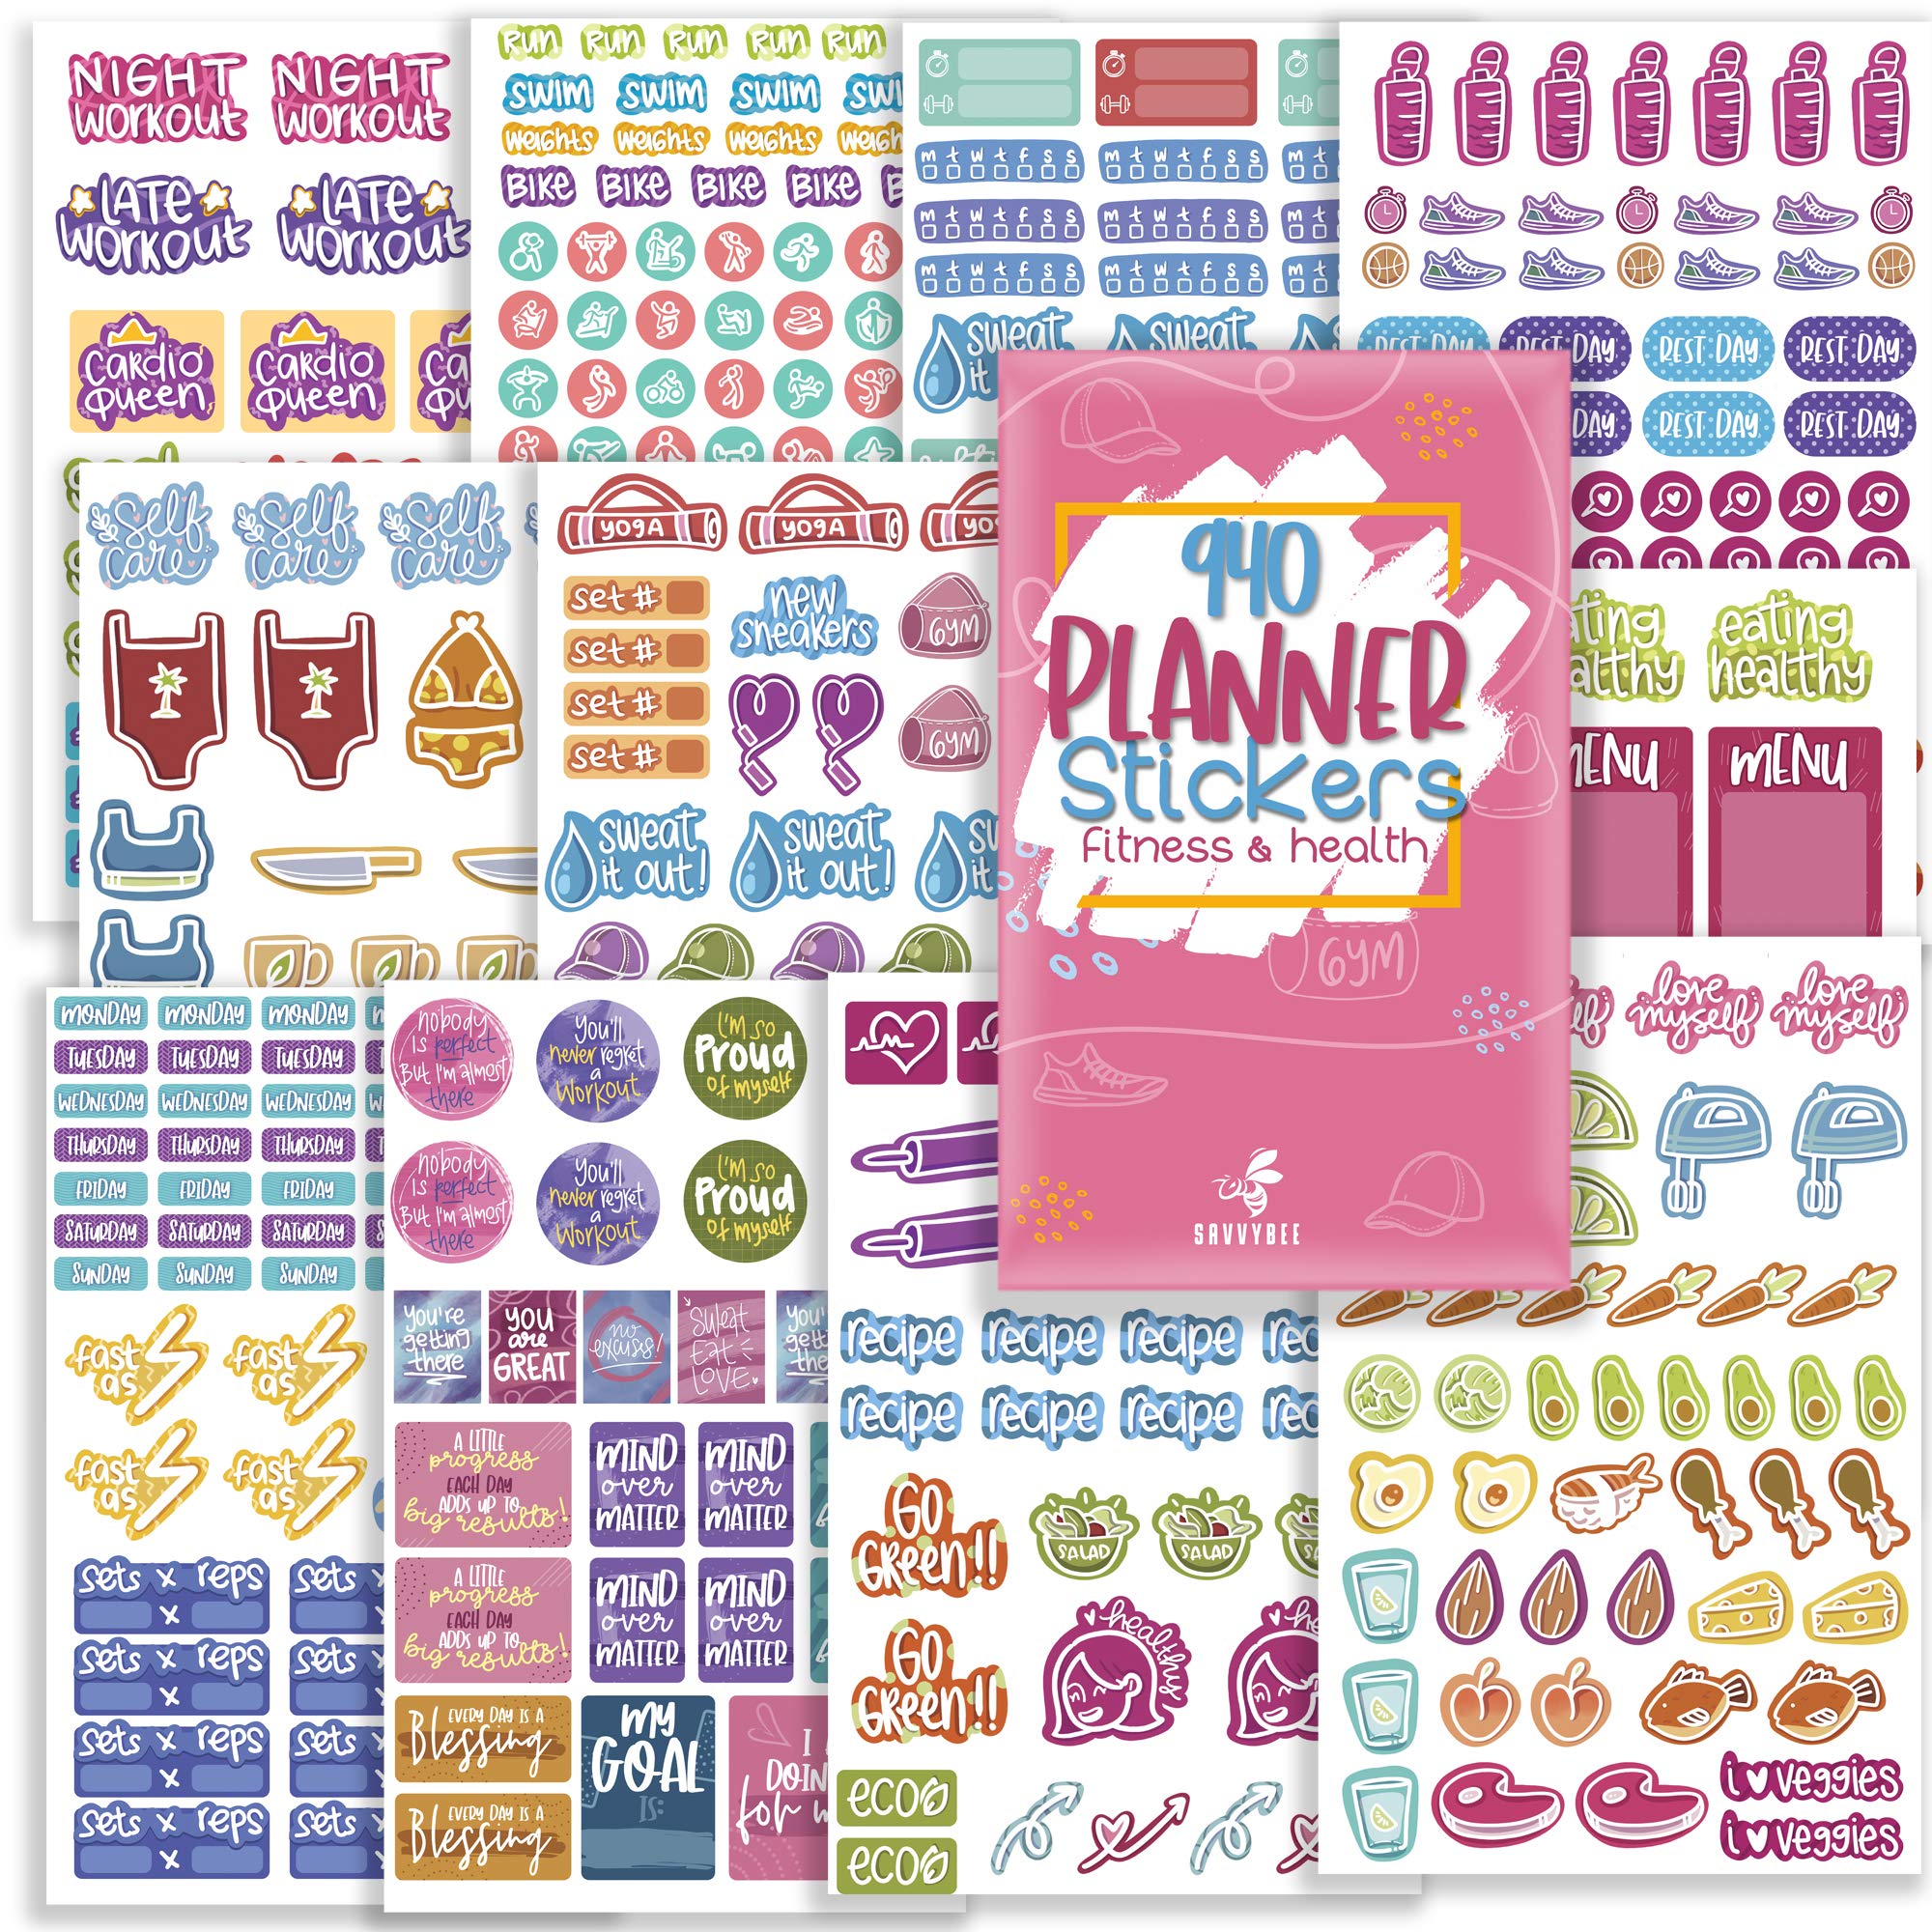 Savvy Bee Planner Fitness Planner Stickers Value Pack of 940 Workout Stickers for Planners and Journals Health, Exercise, Weight Tracking and Meal